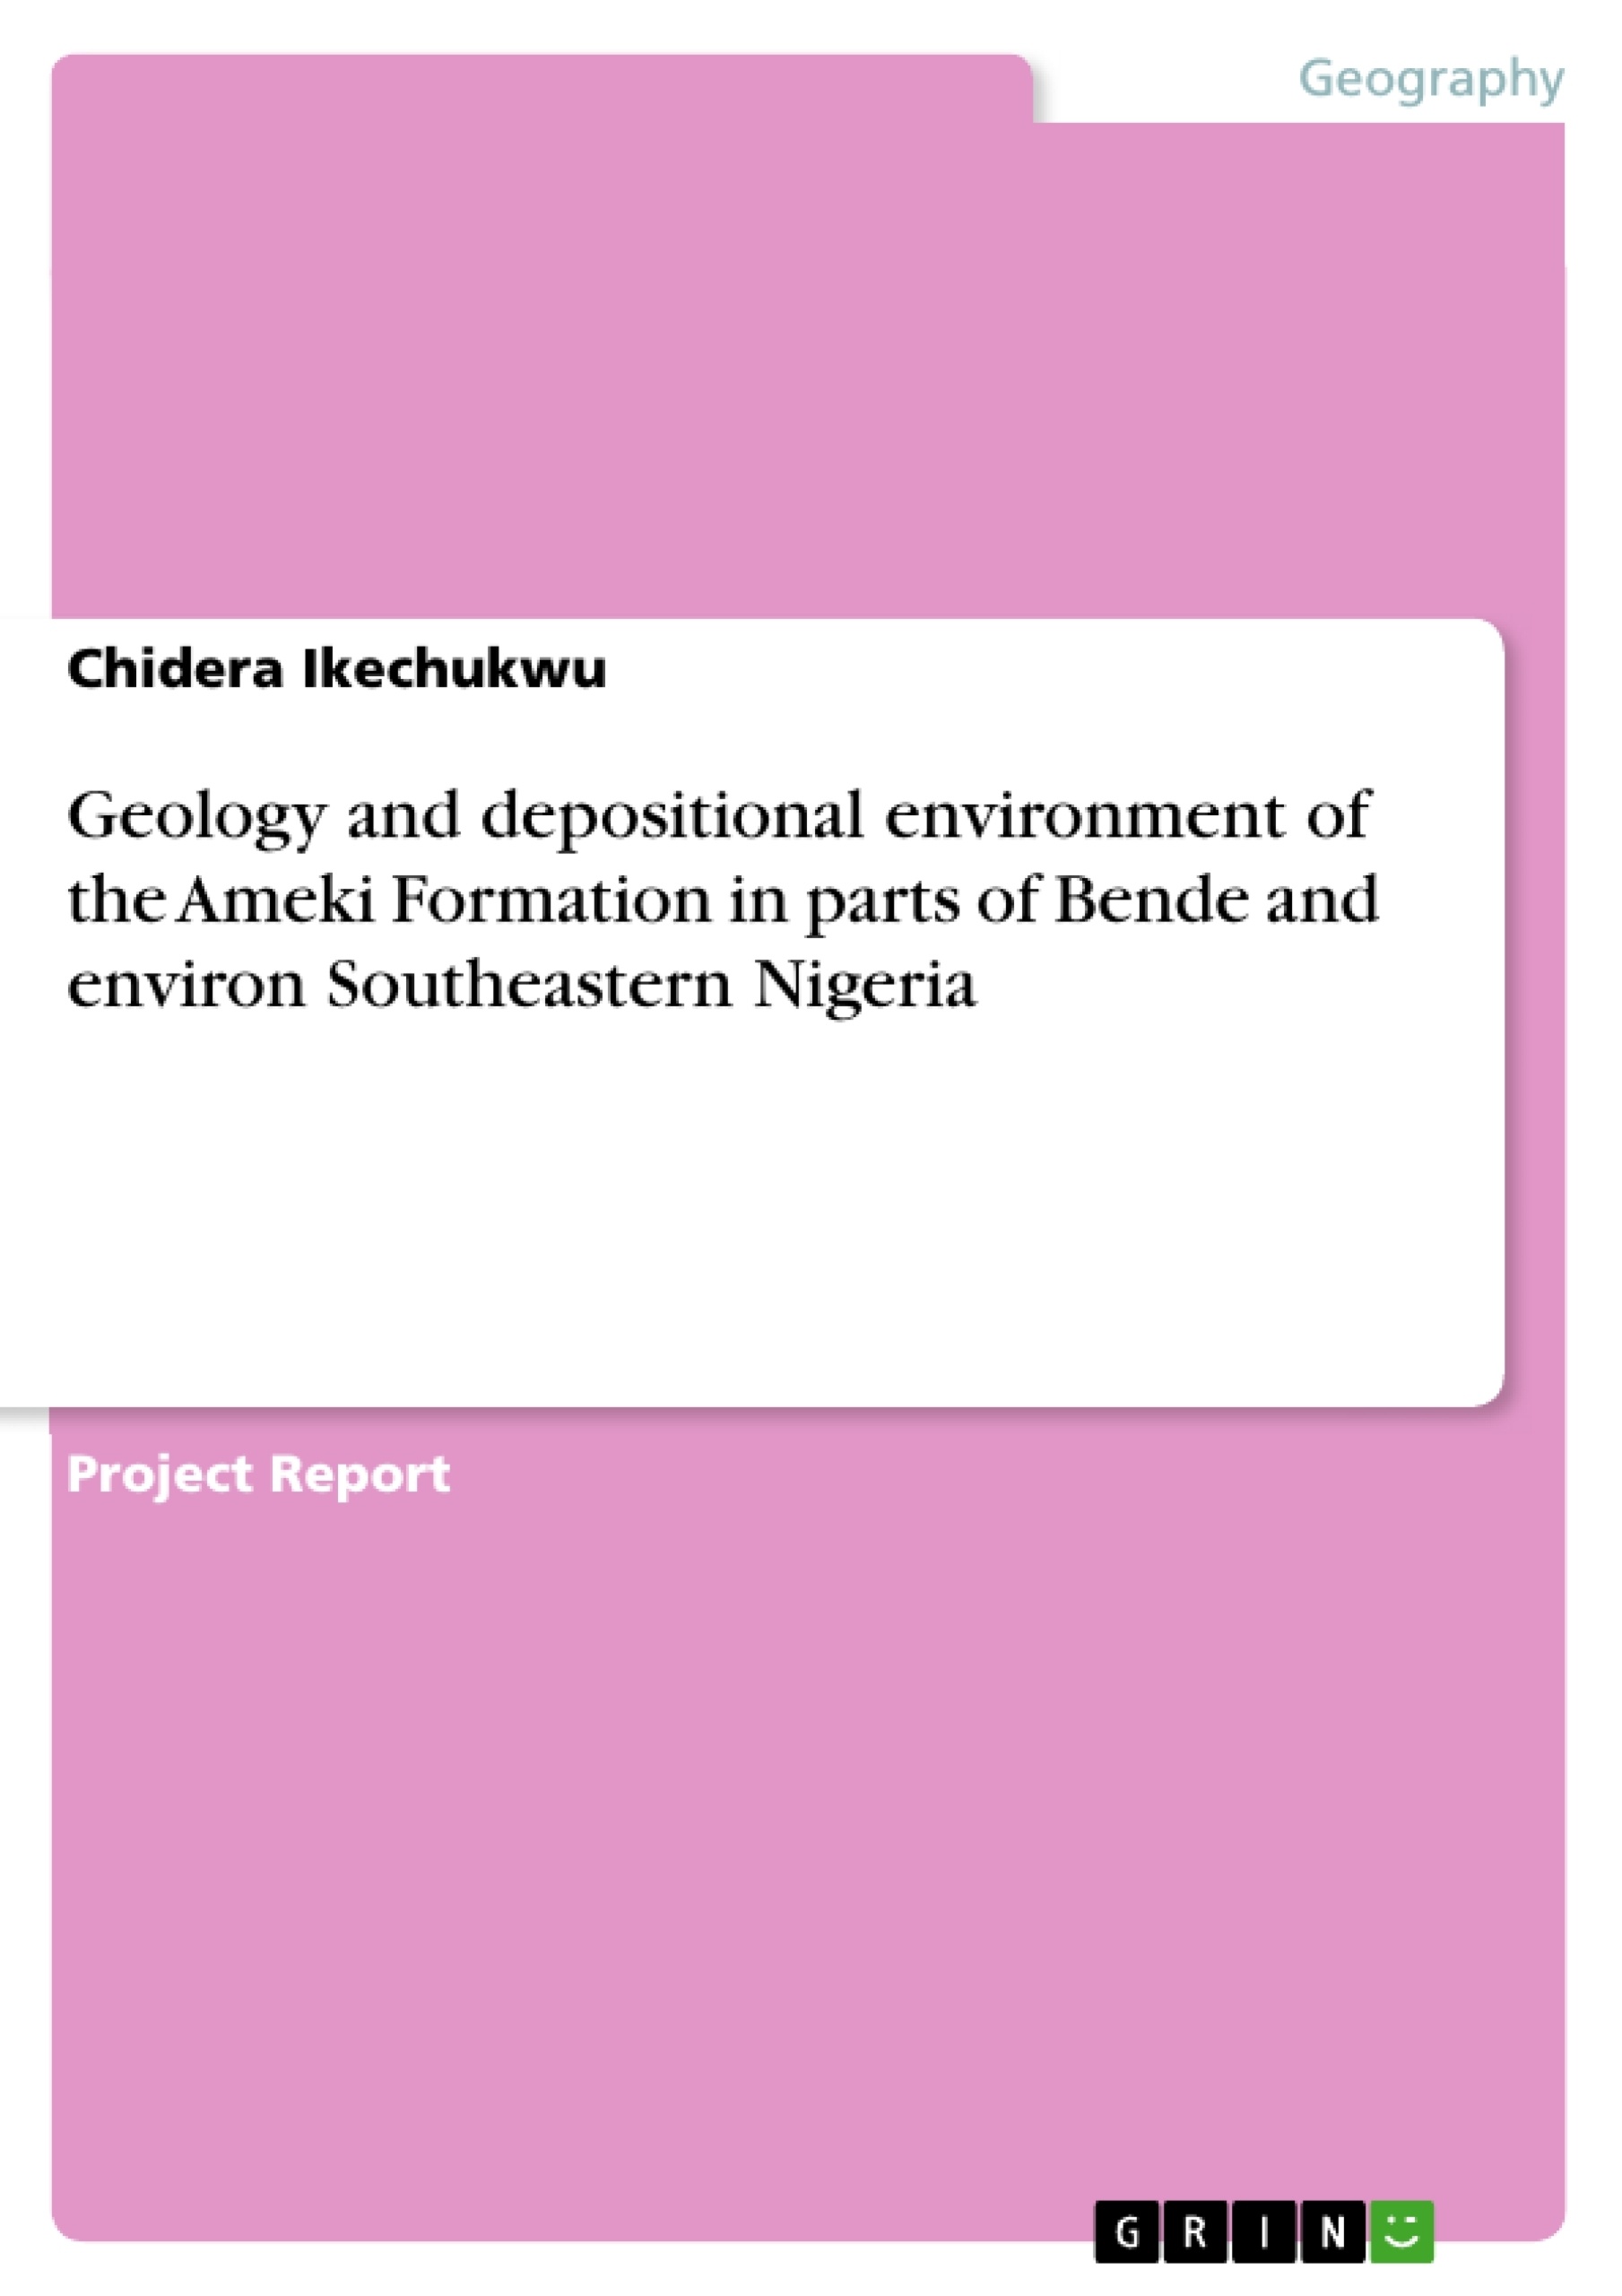 Titel: Geology and depositional environment of the Ameki Formation in parts of Bende and environ Southeastern Nigeria